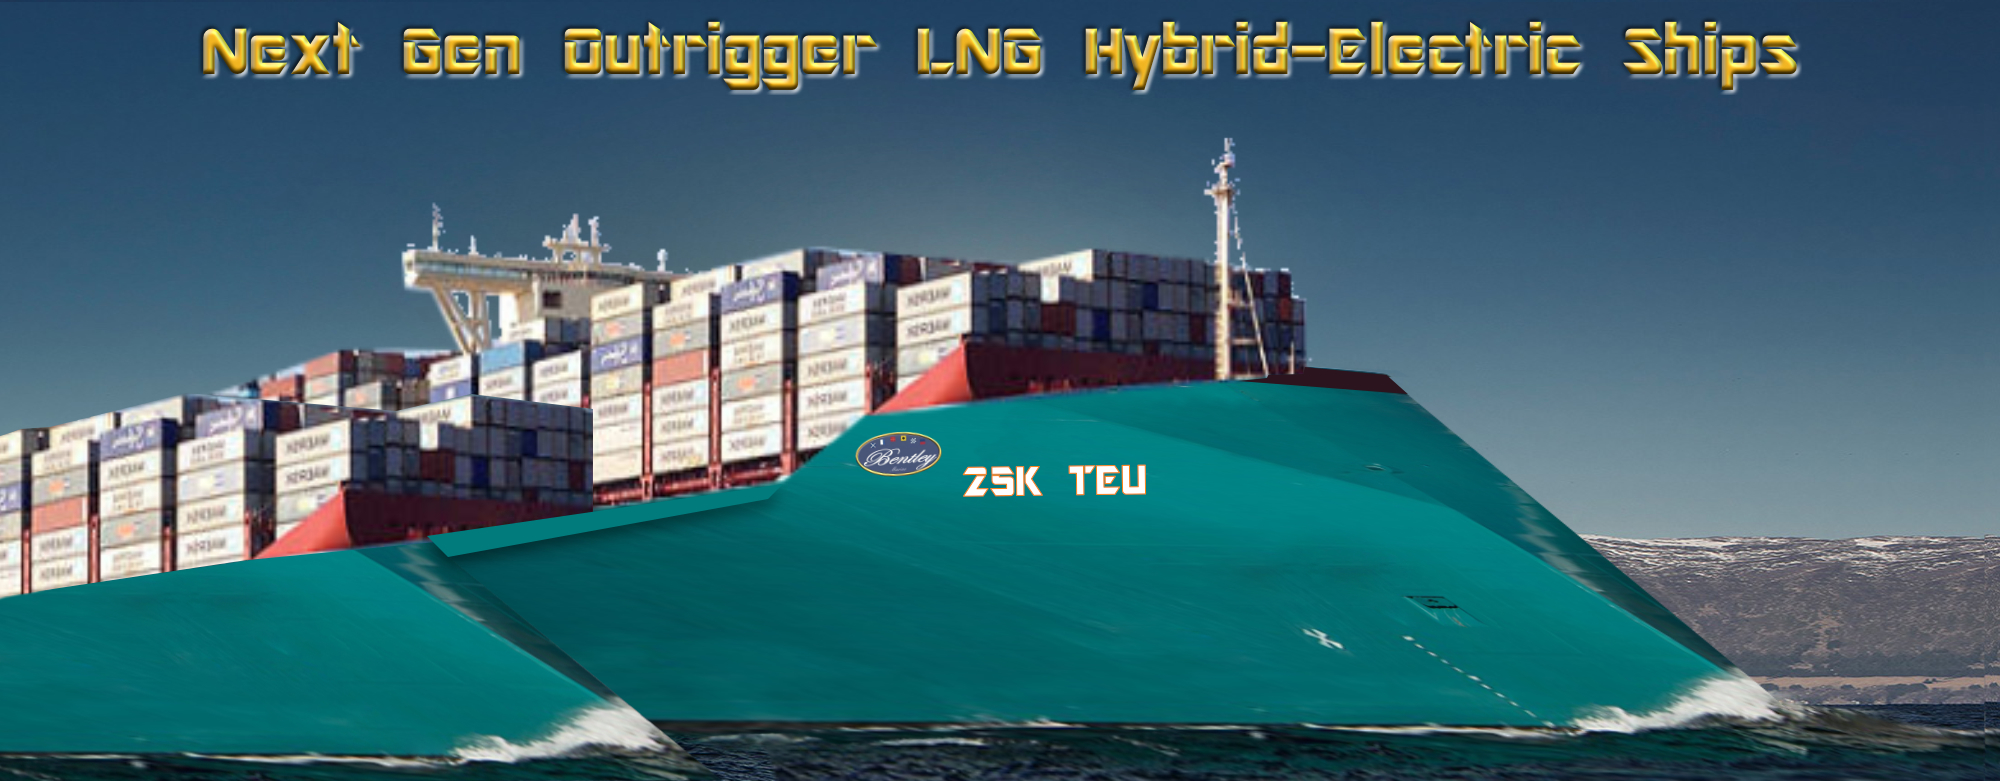 Next Gen Hybrid Electric Container Ships